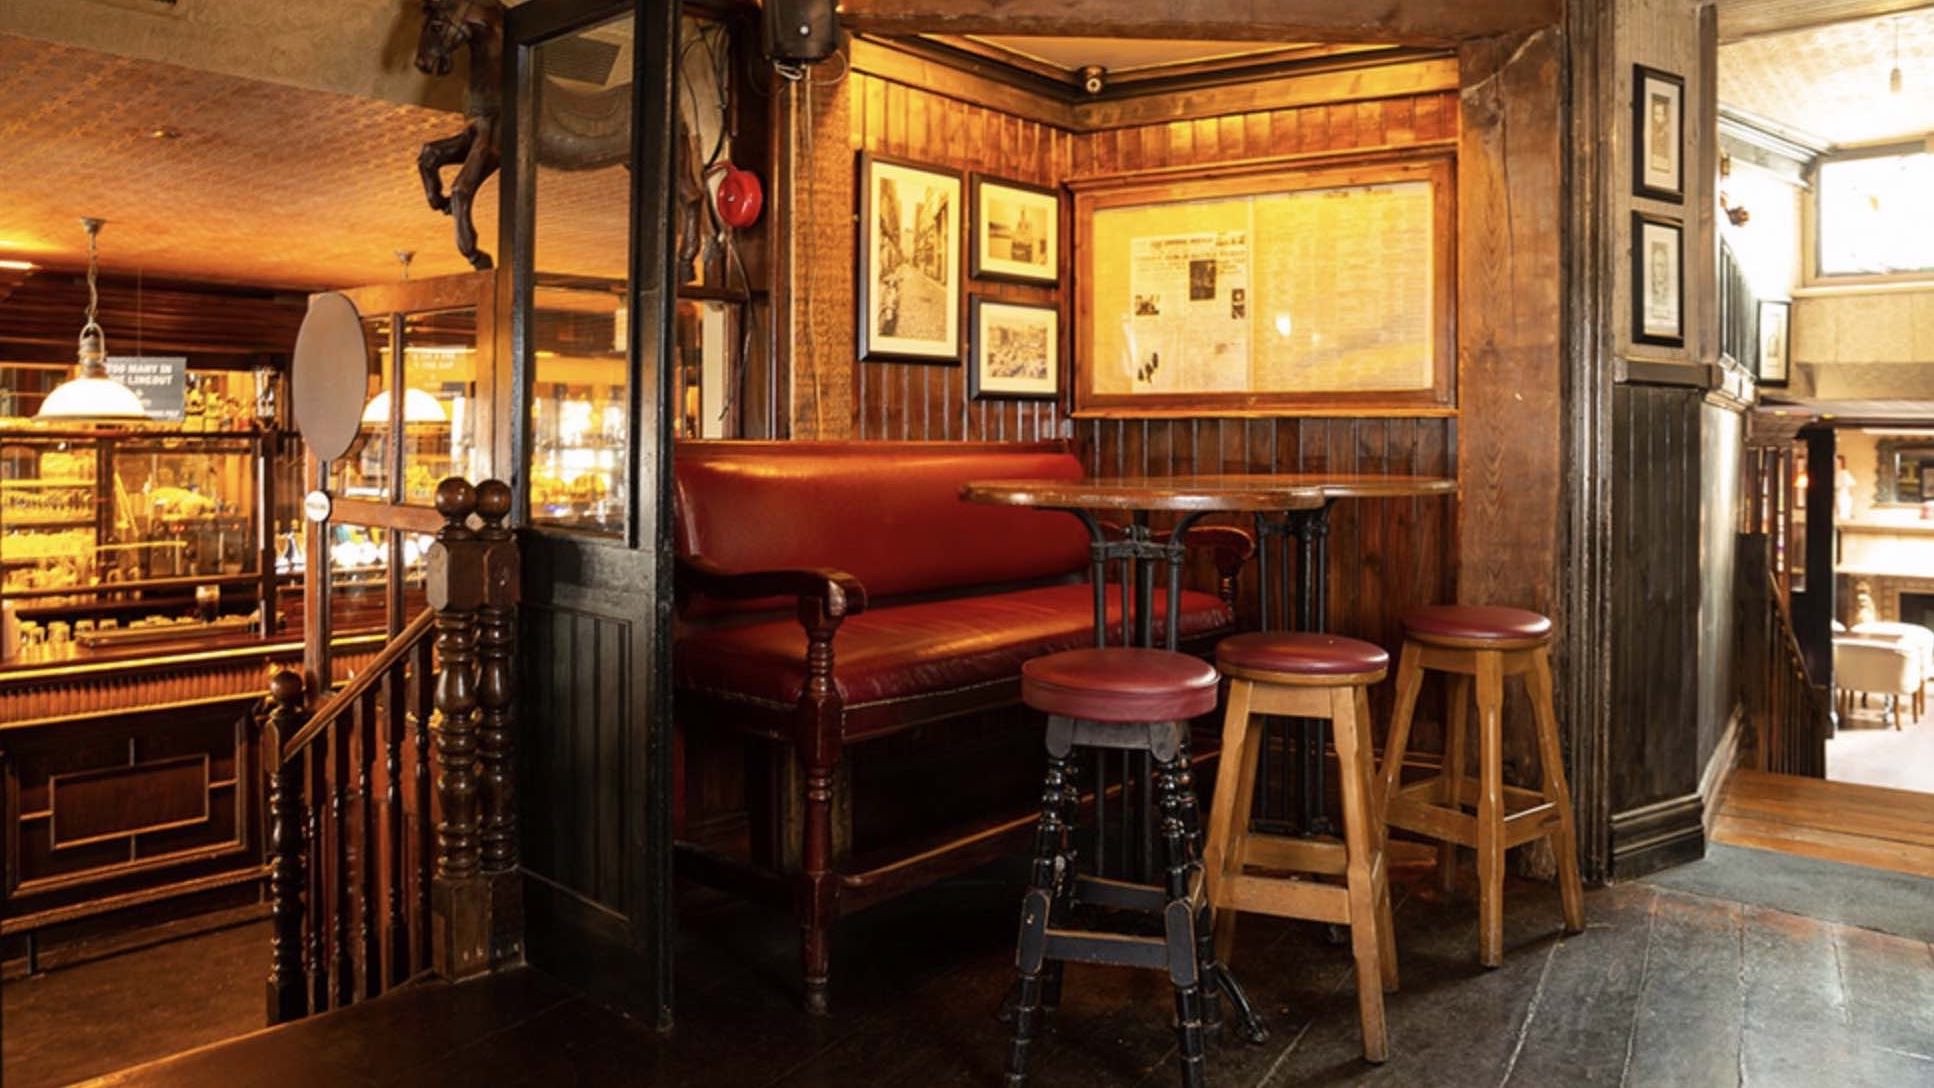 The Draper Rooms is one of the best pub hotels in Dublin with bar scene and stools